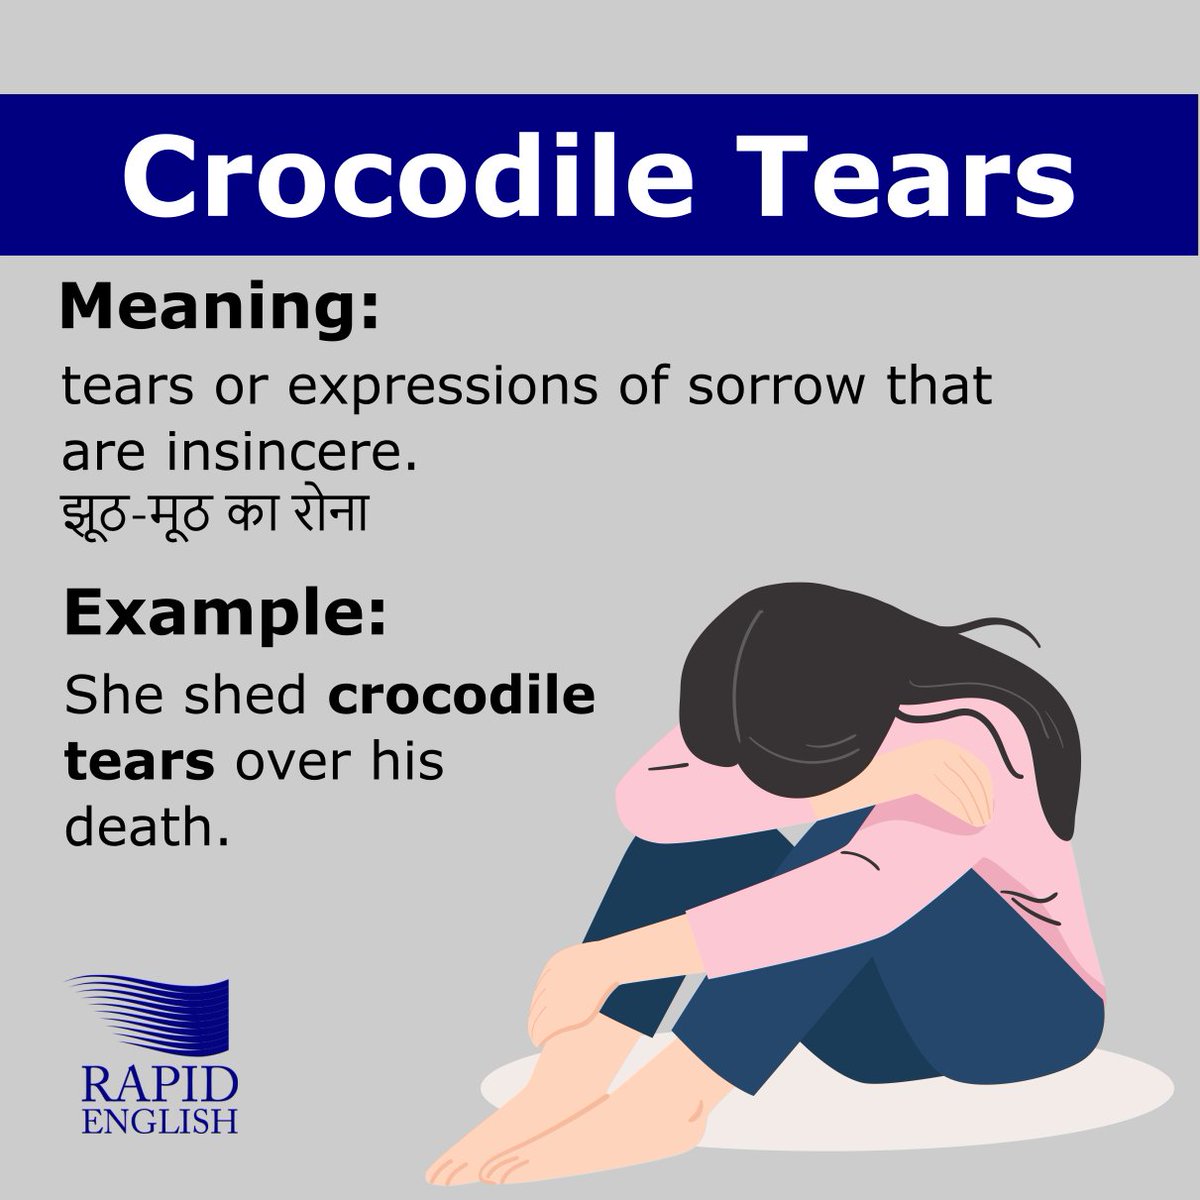 Crocodile Tears: Why Do We Use This Phrase? Origins, History & Meaning